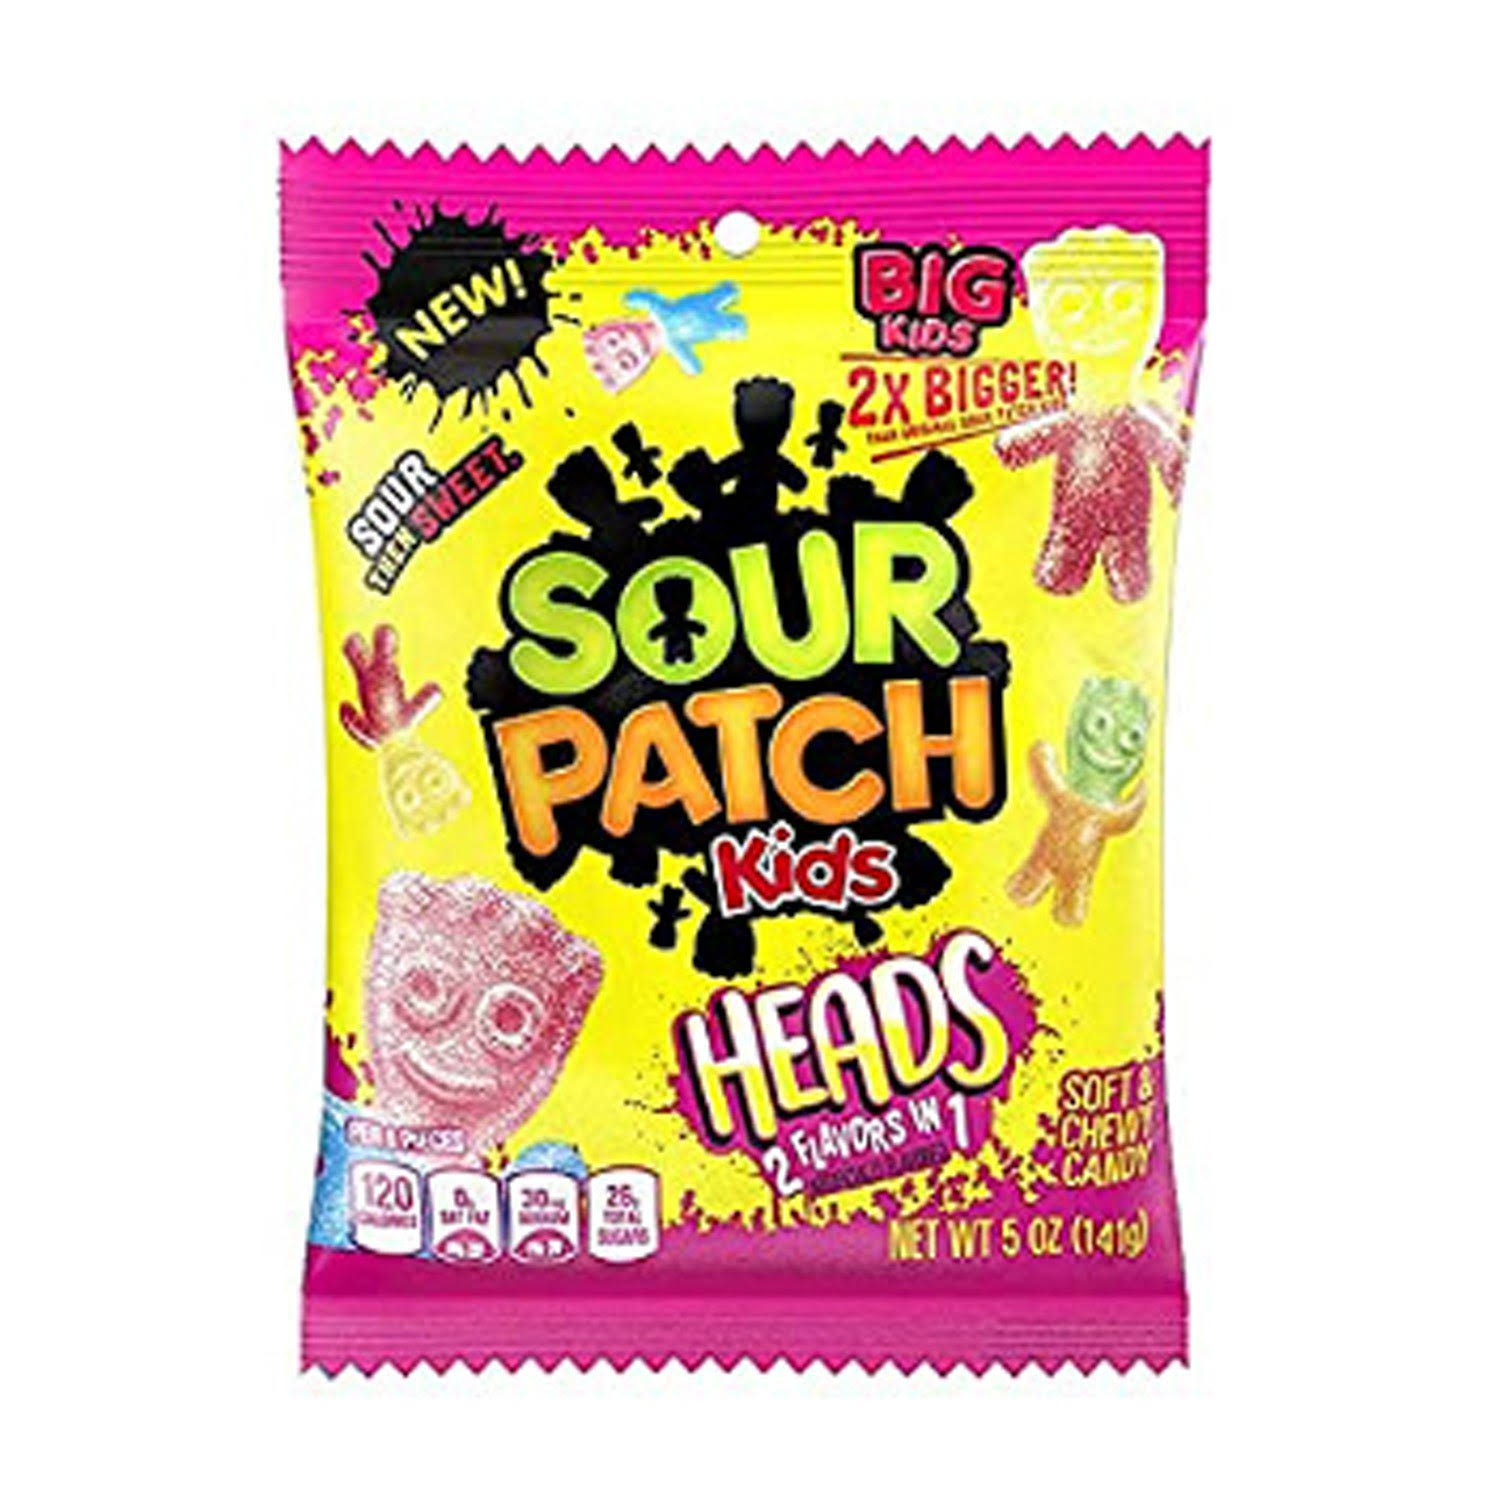 Sour Patch Kids Heads